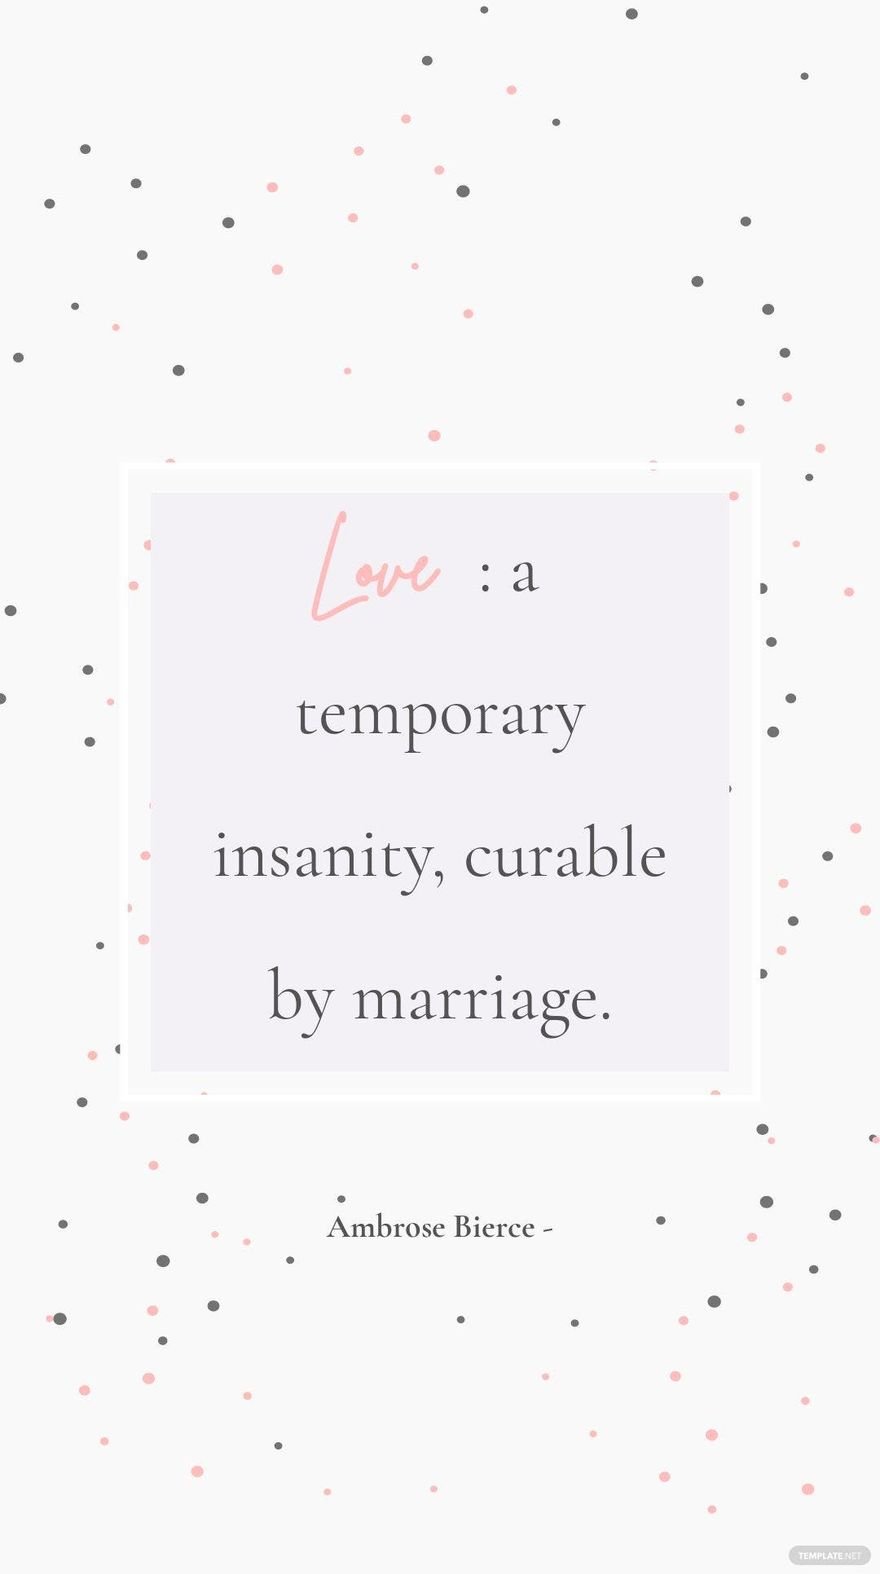 Ambrose Bierce - “Love: a temporary insanity, curable by marriage.”